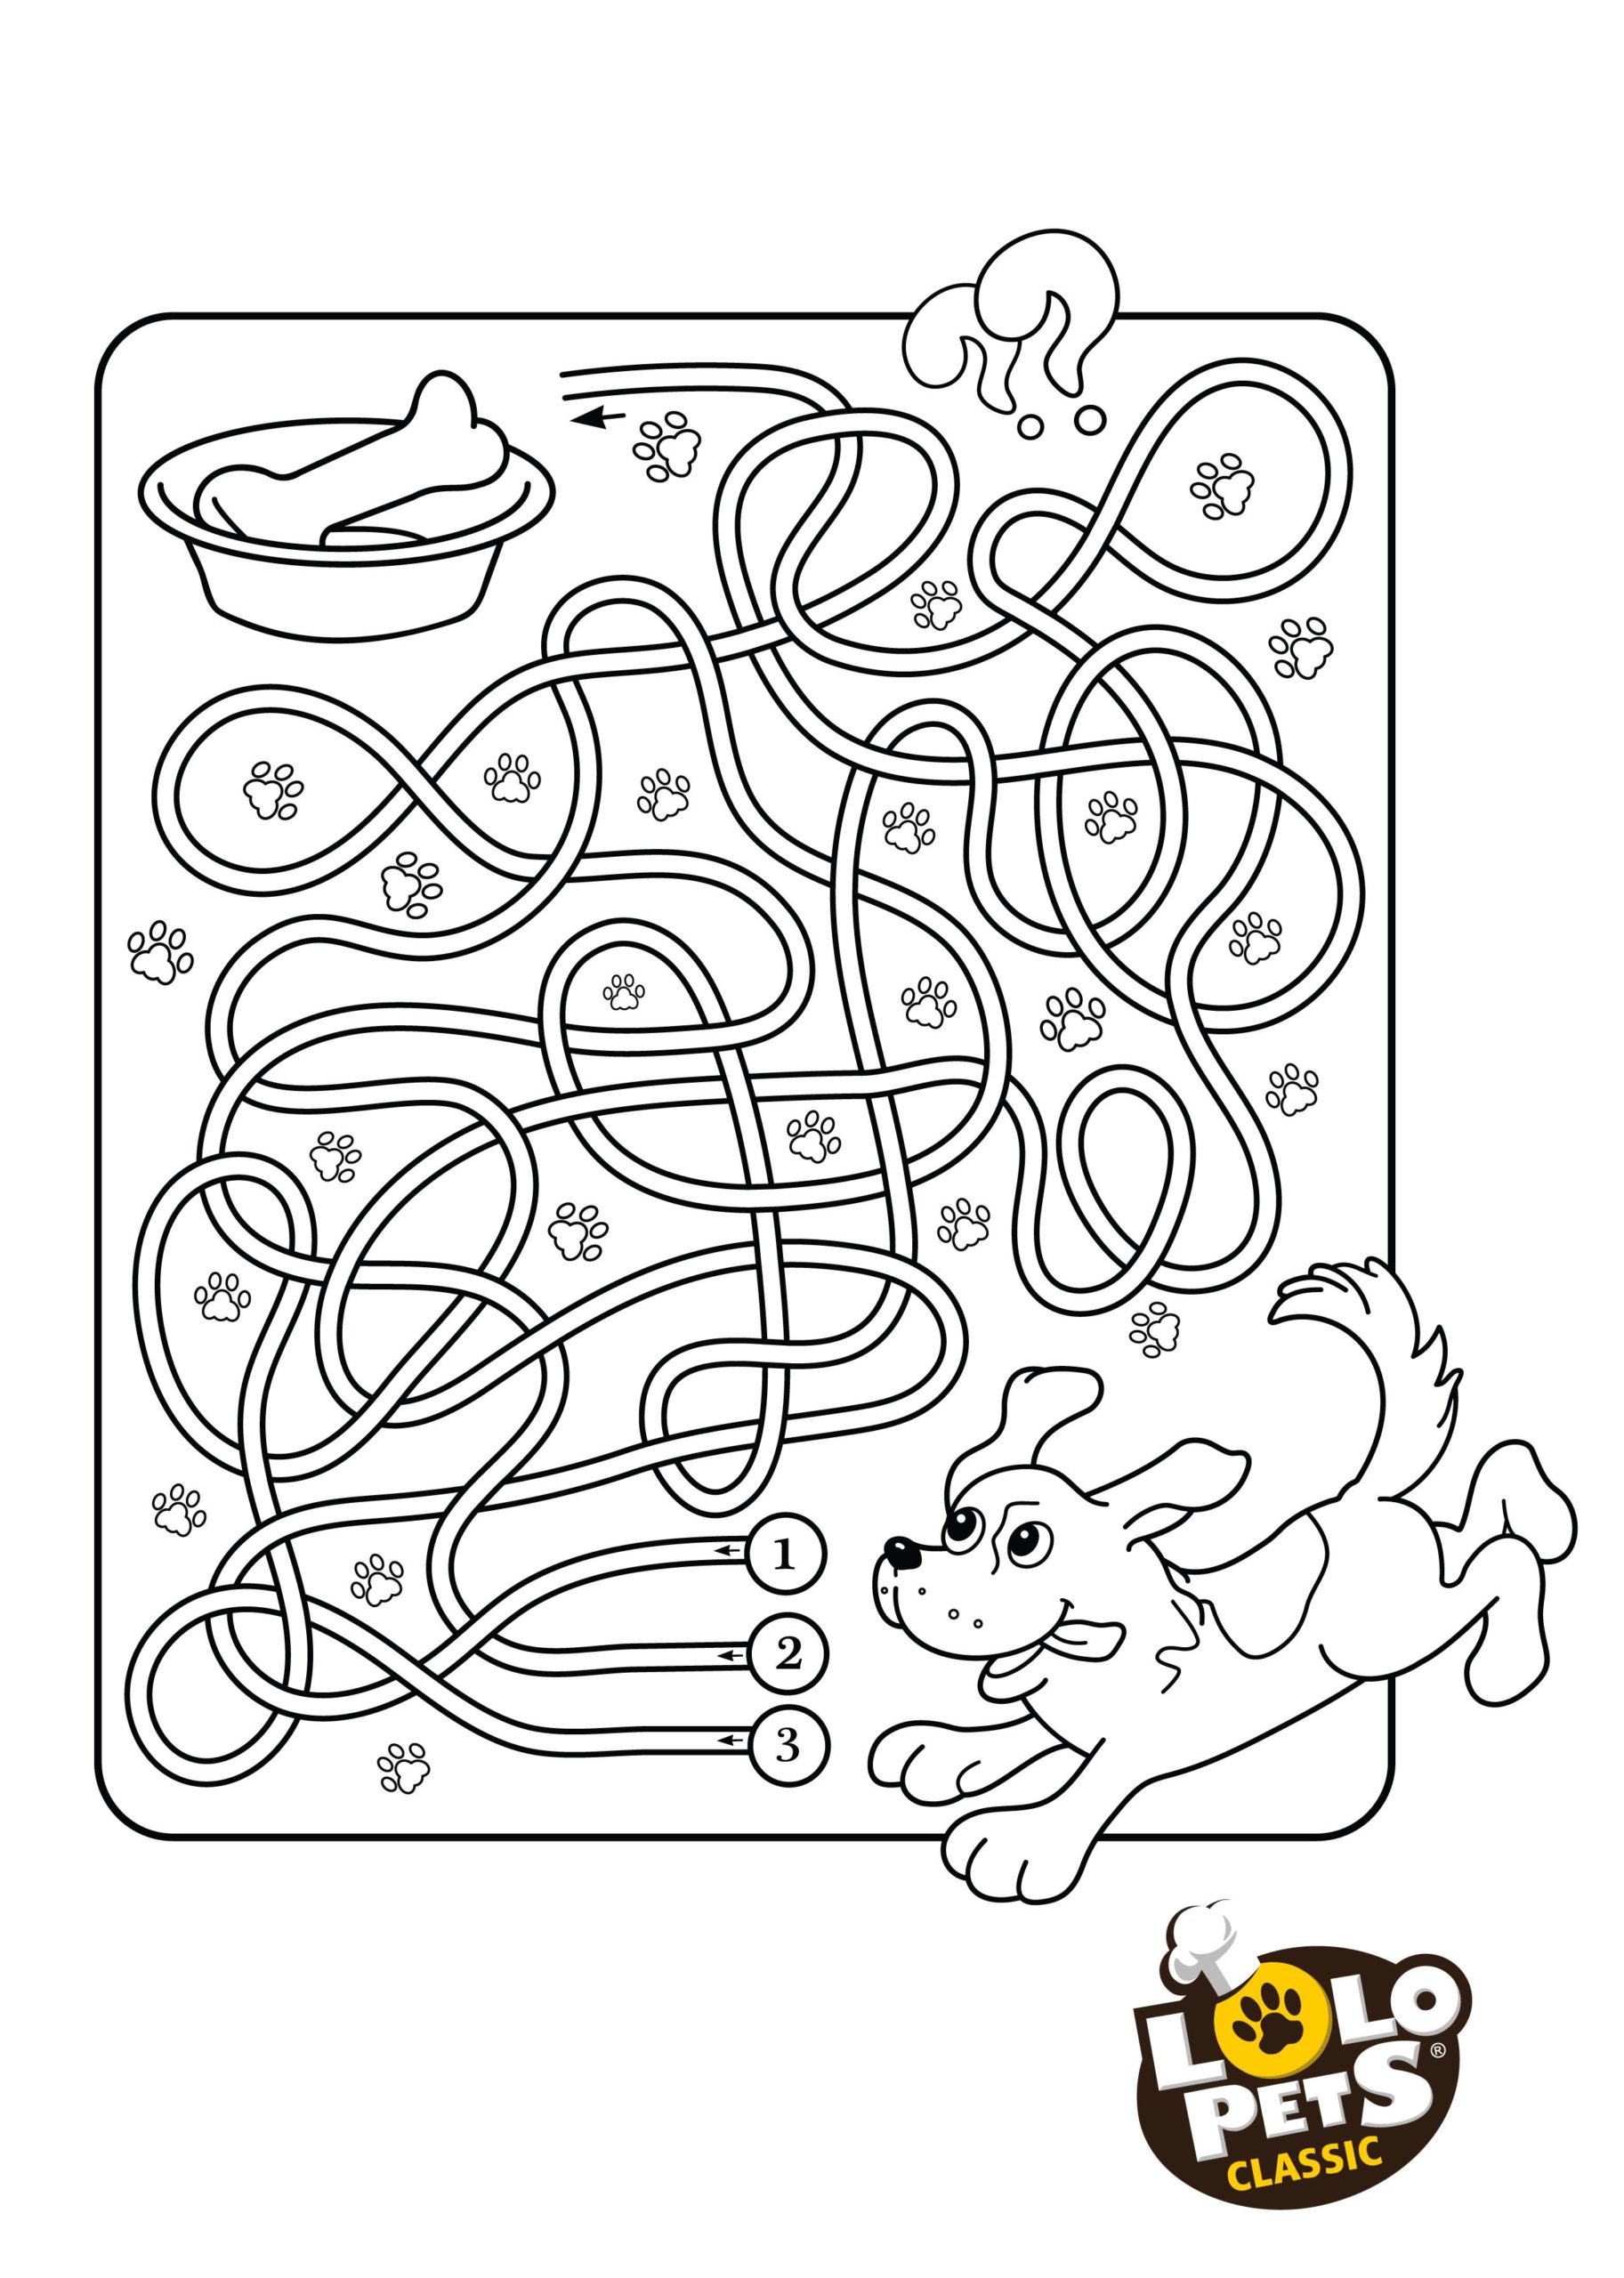 Educational Coloring Pages For Children s Day Lolo Pets Classic